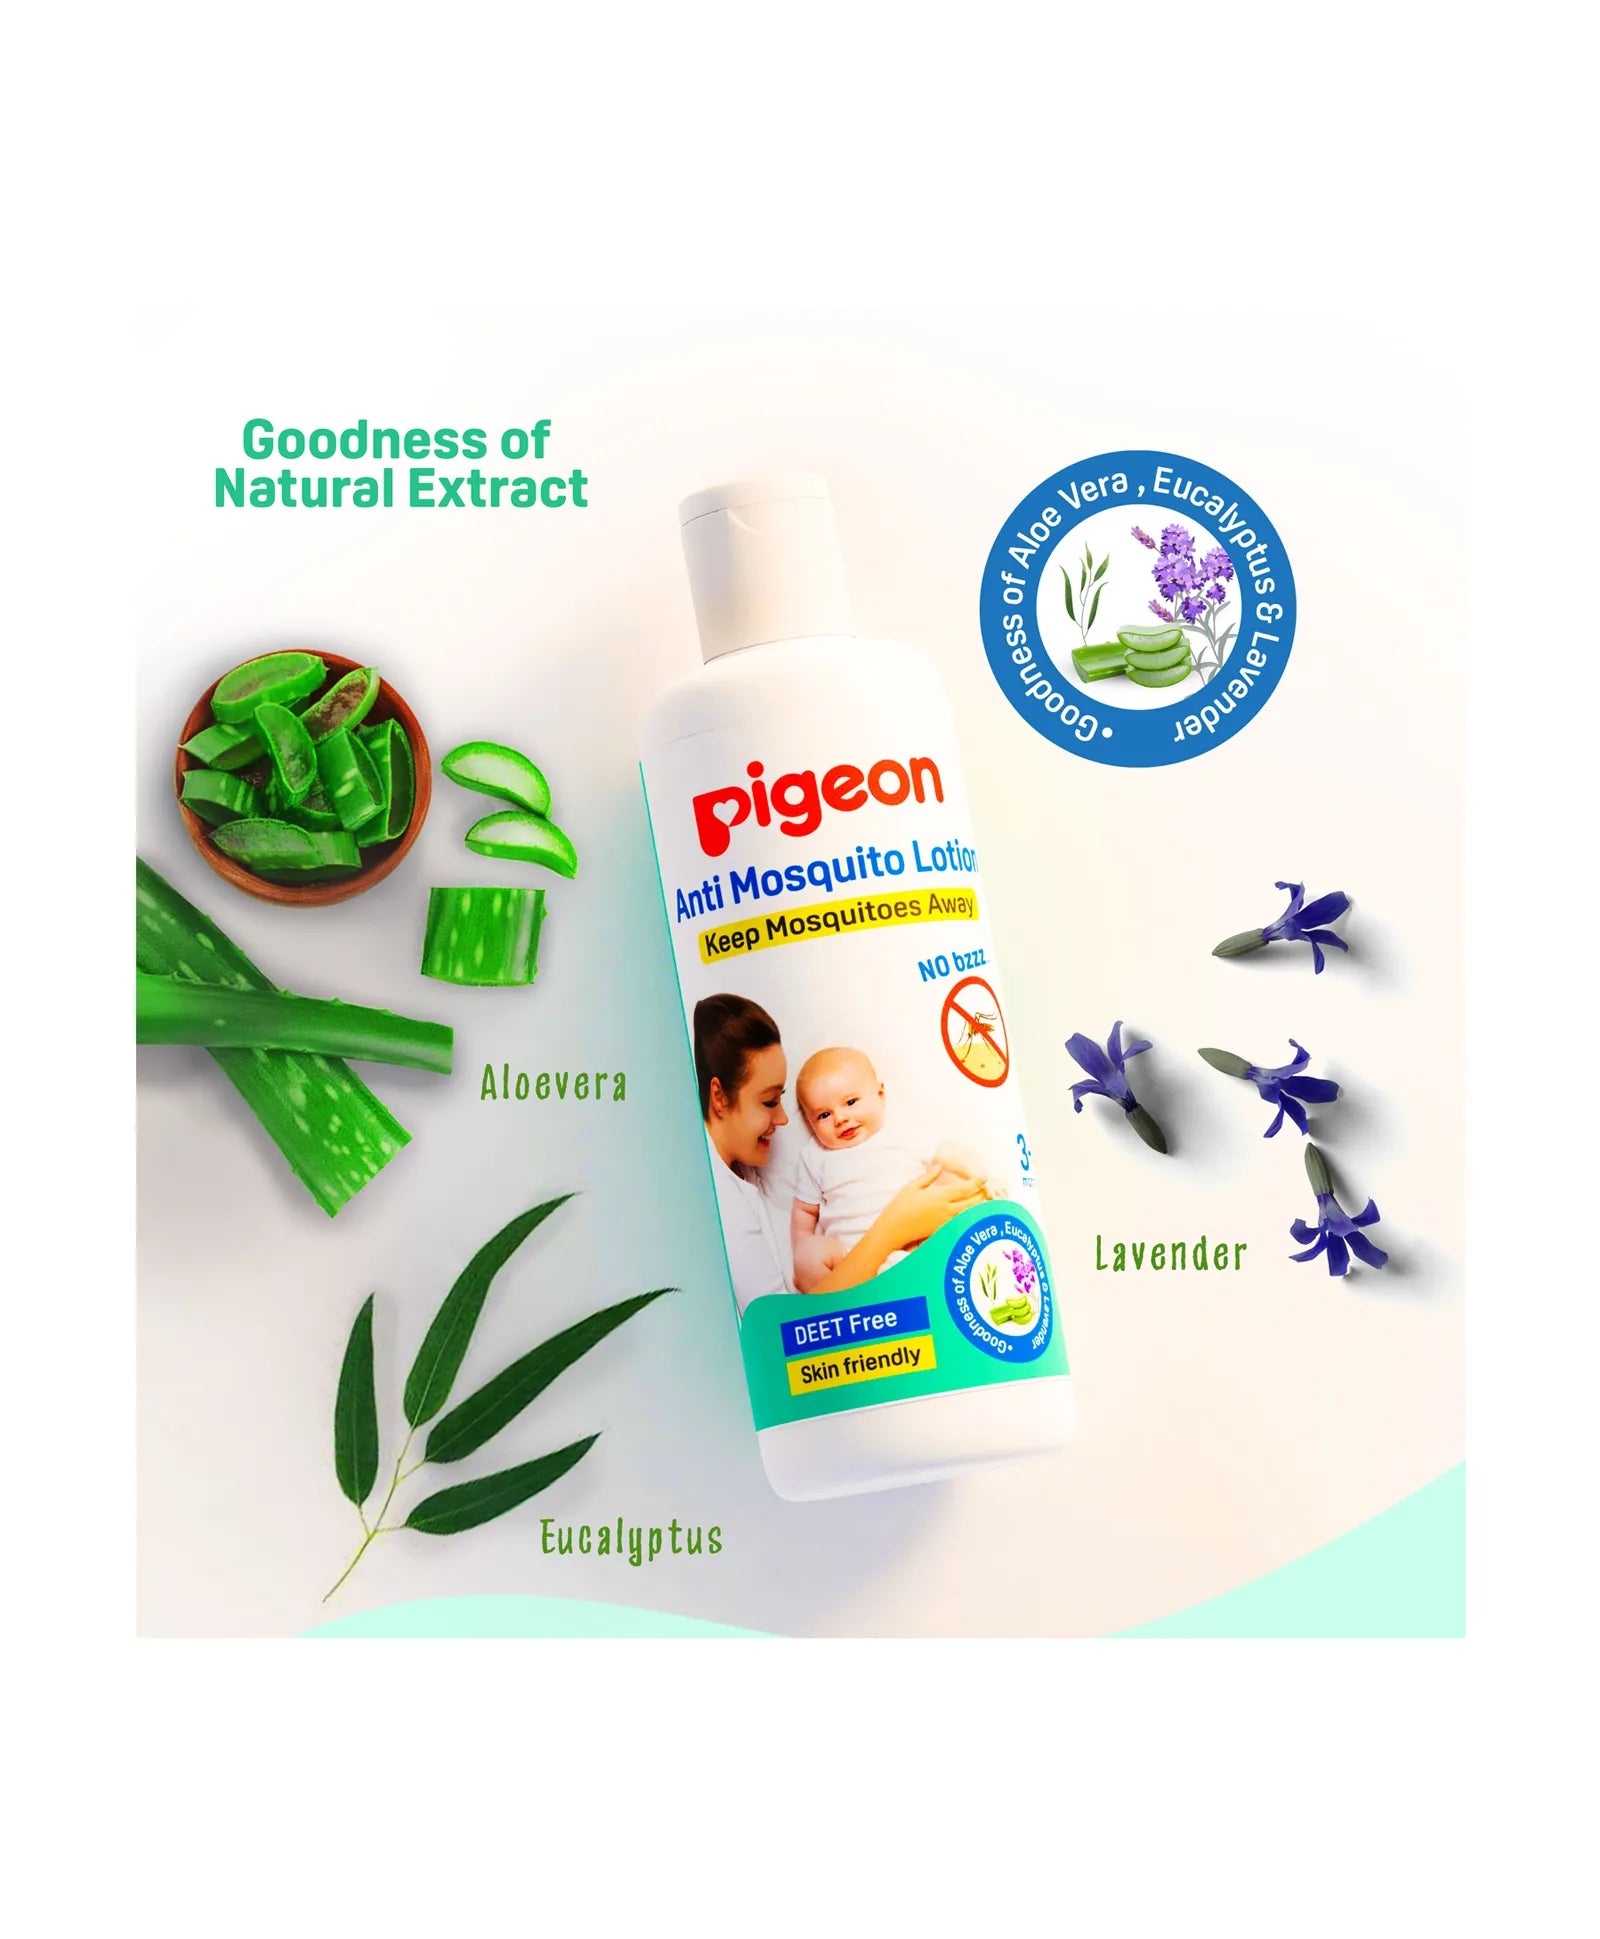 Buy Pigeon Anti Mosquito Lotion for Small Children - 100ml Online in India at uyyaala.com